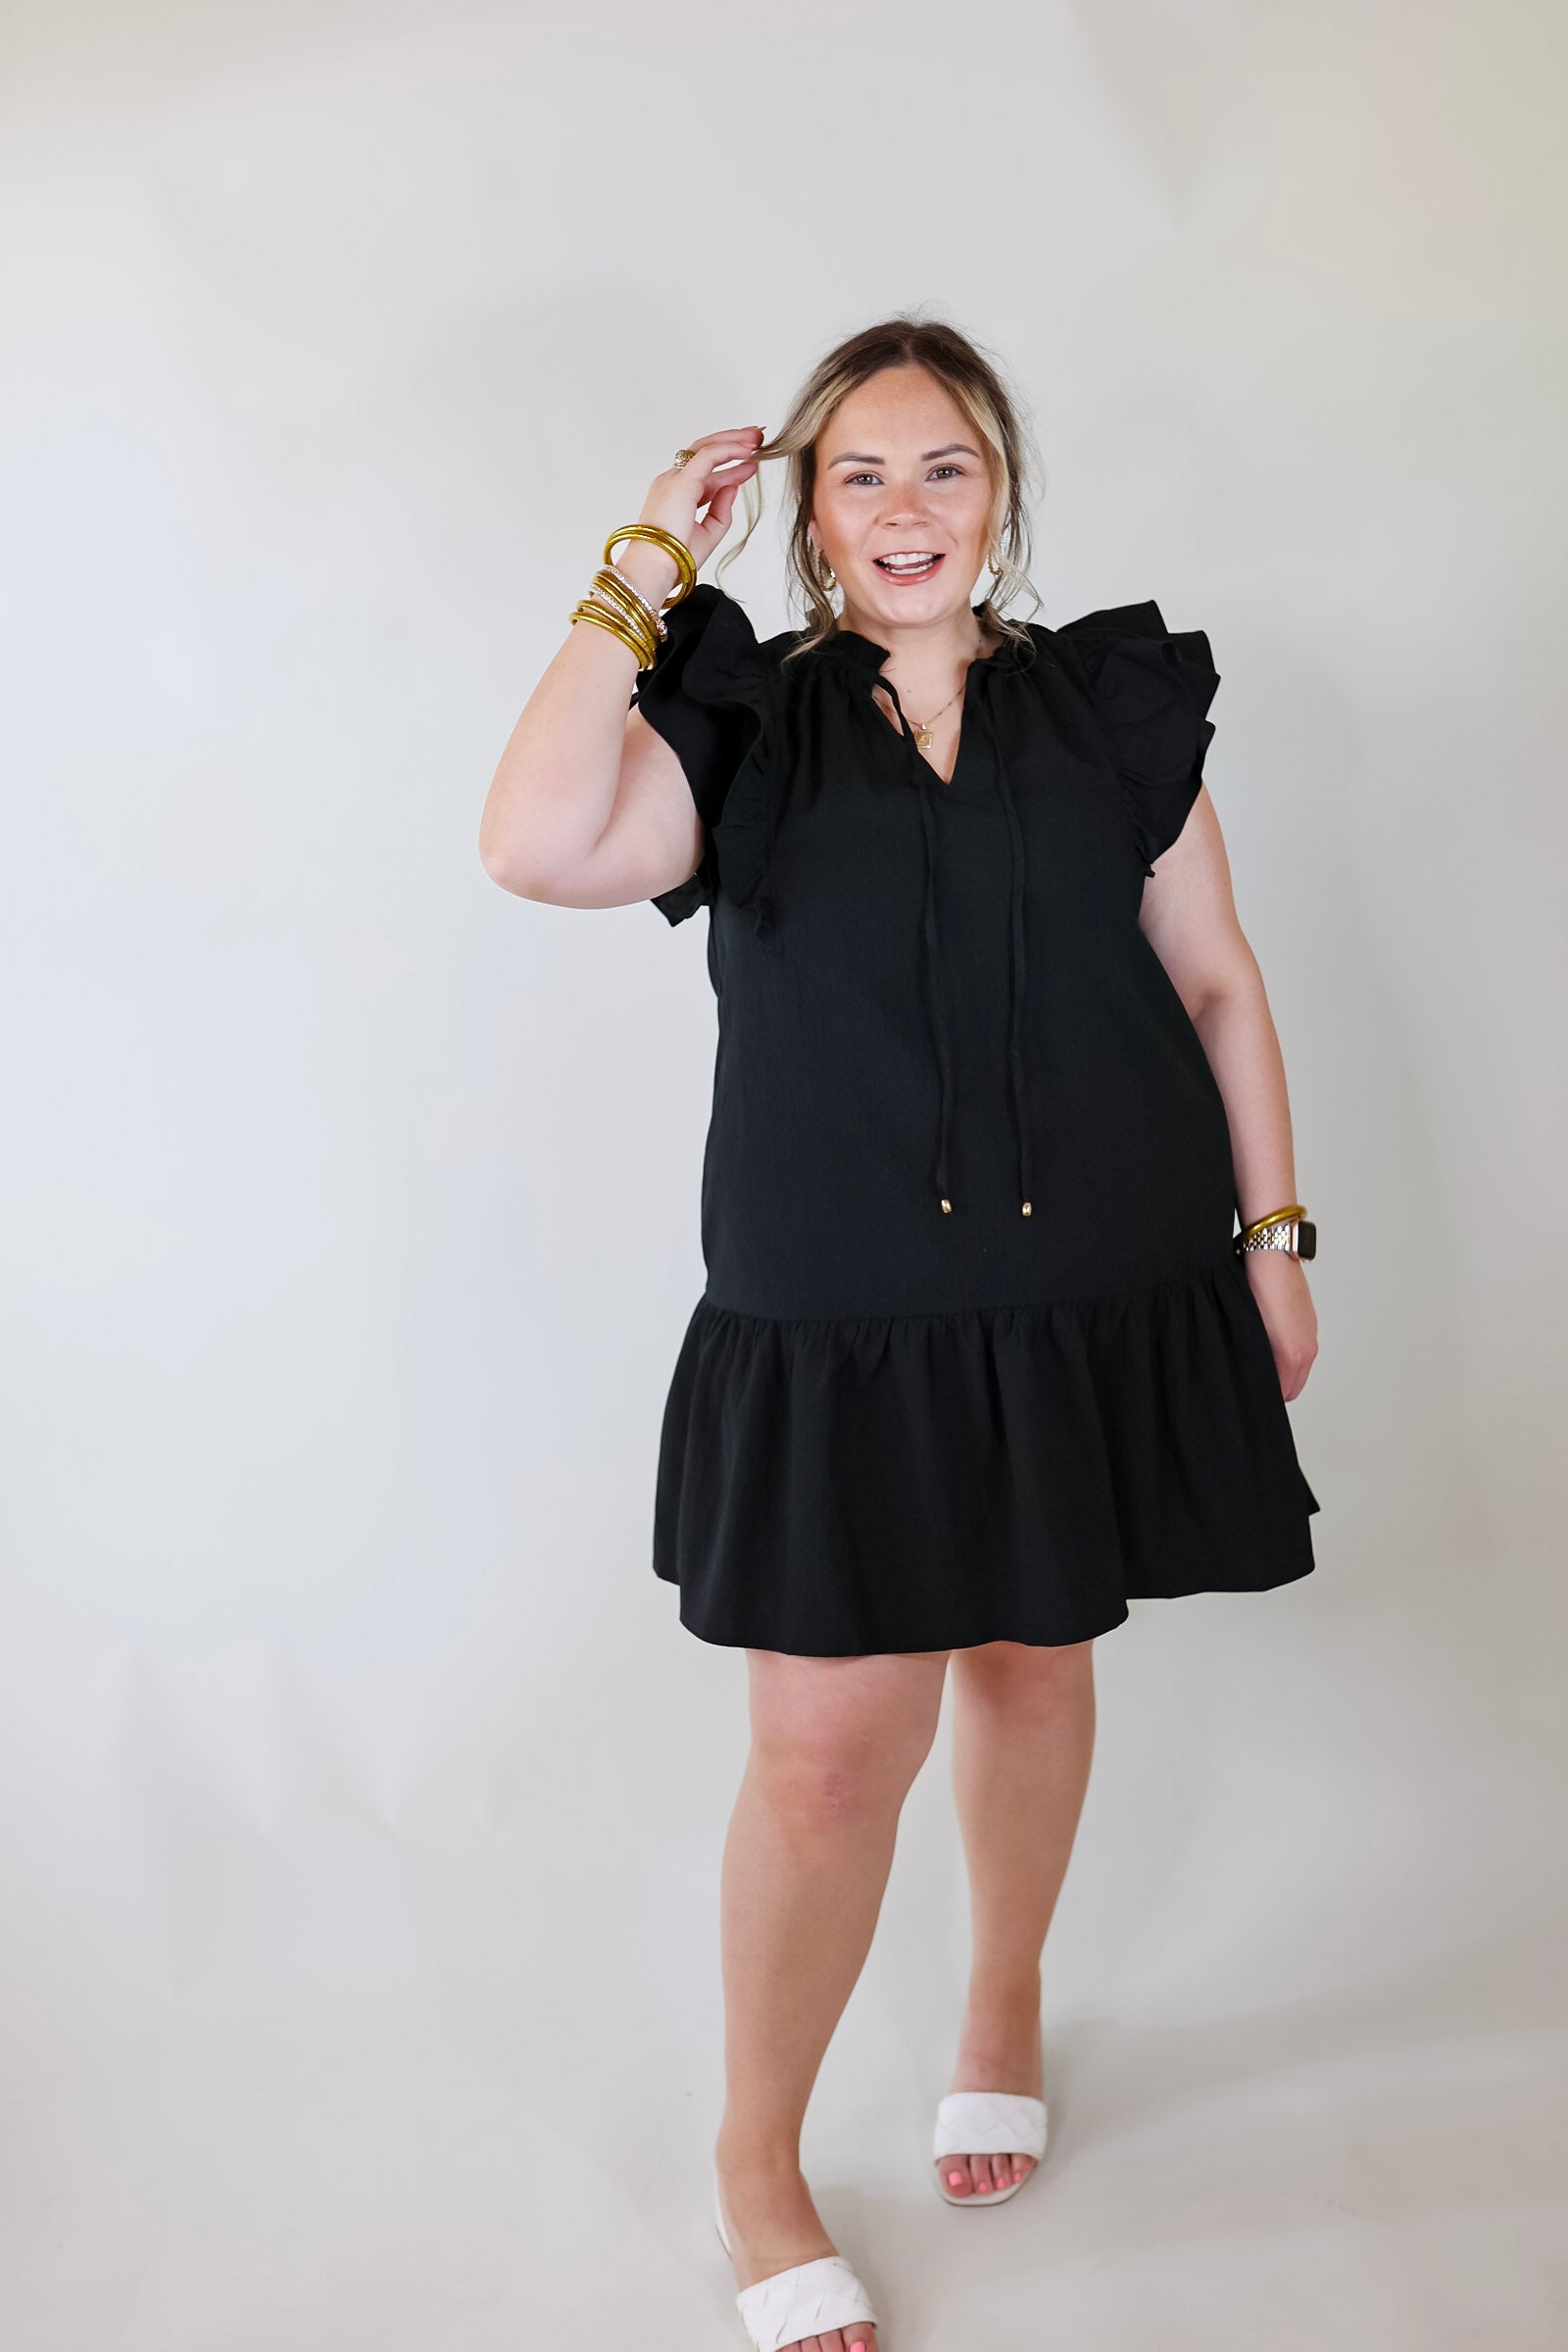 Powerful Love Ruffle Cap Sleeve Dress with Keyhole and Tie Neckline in Black - Giddy Up Glamour Boutique